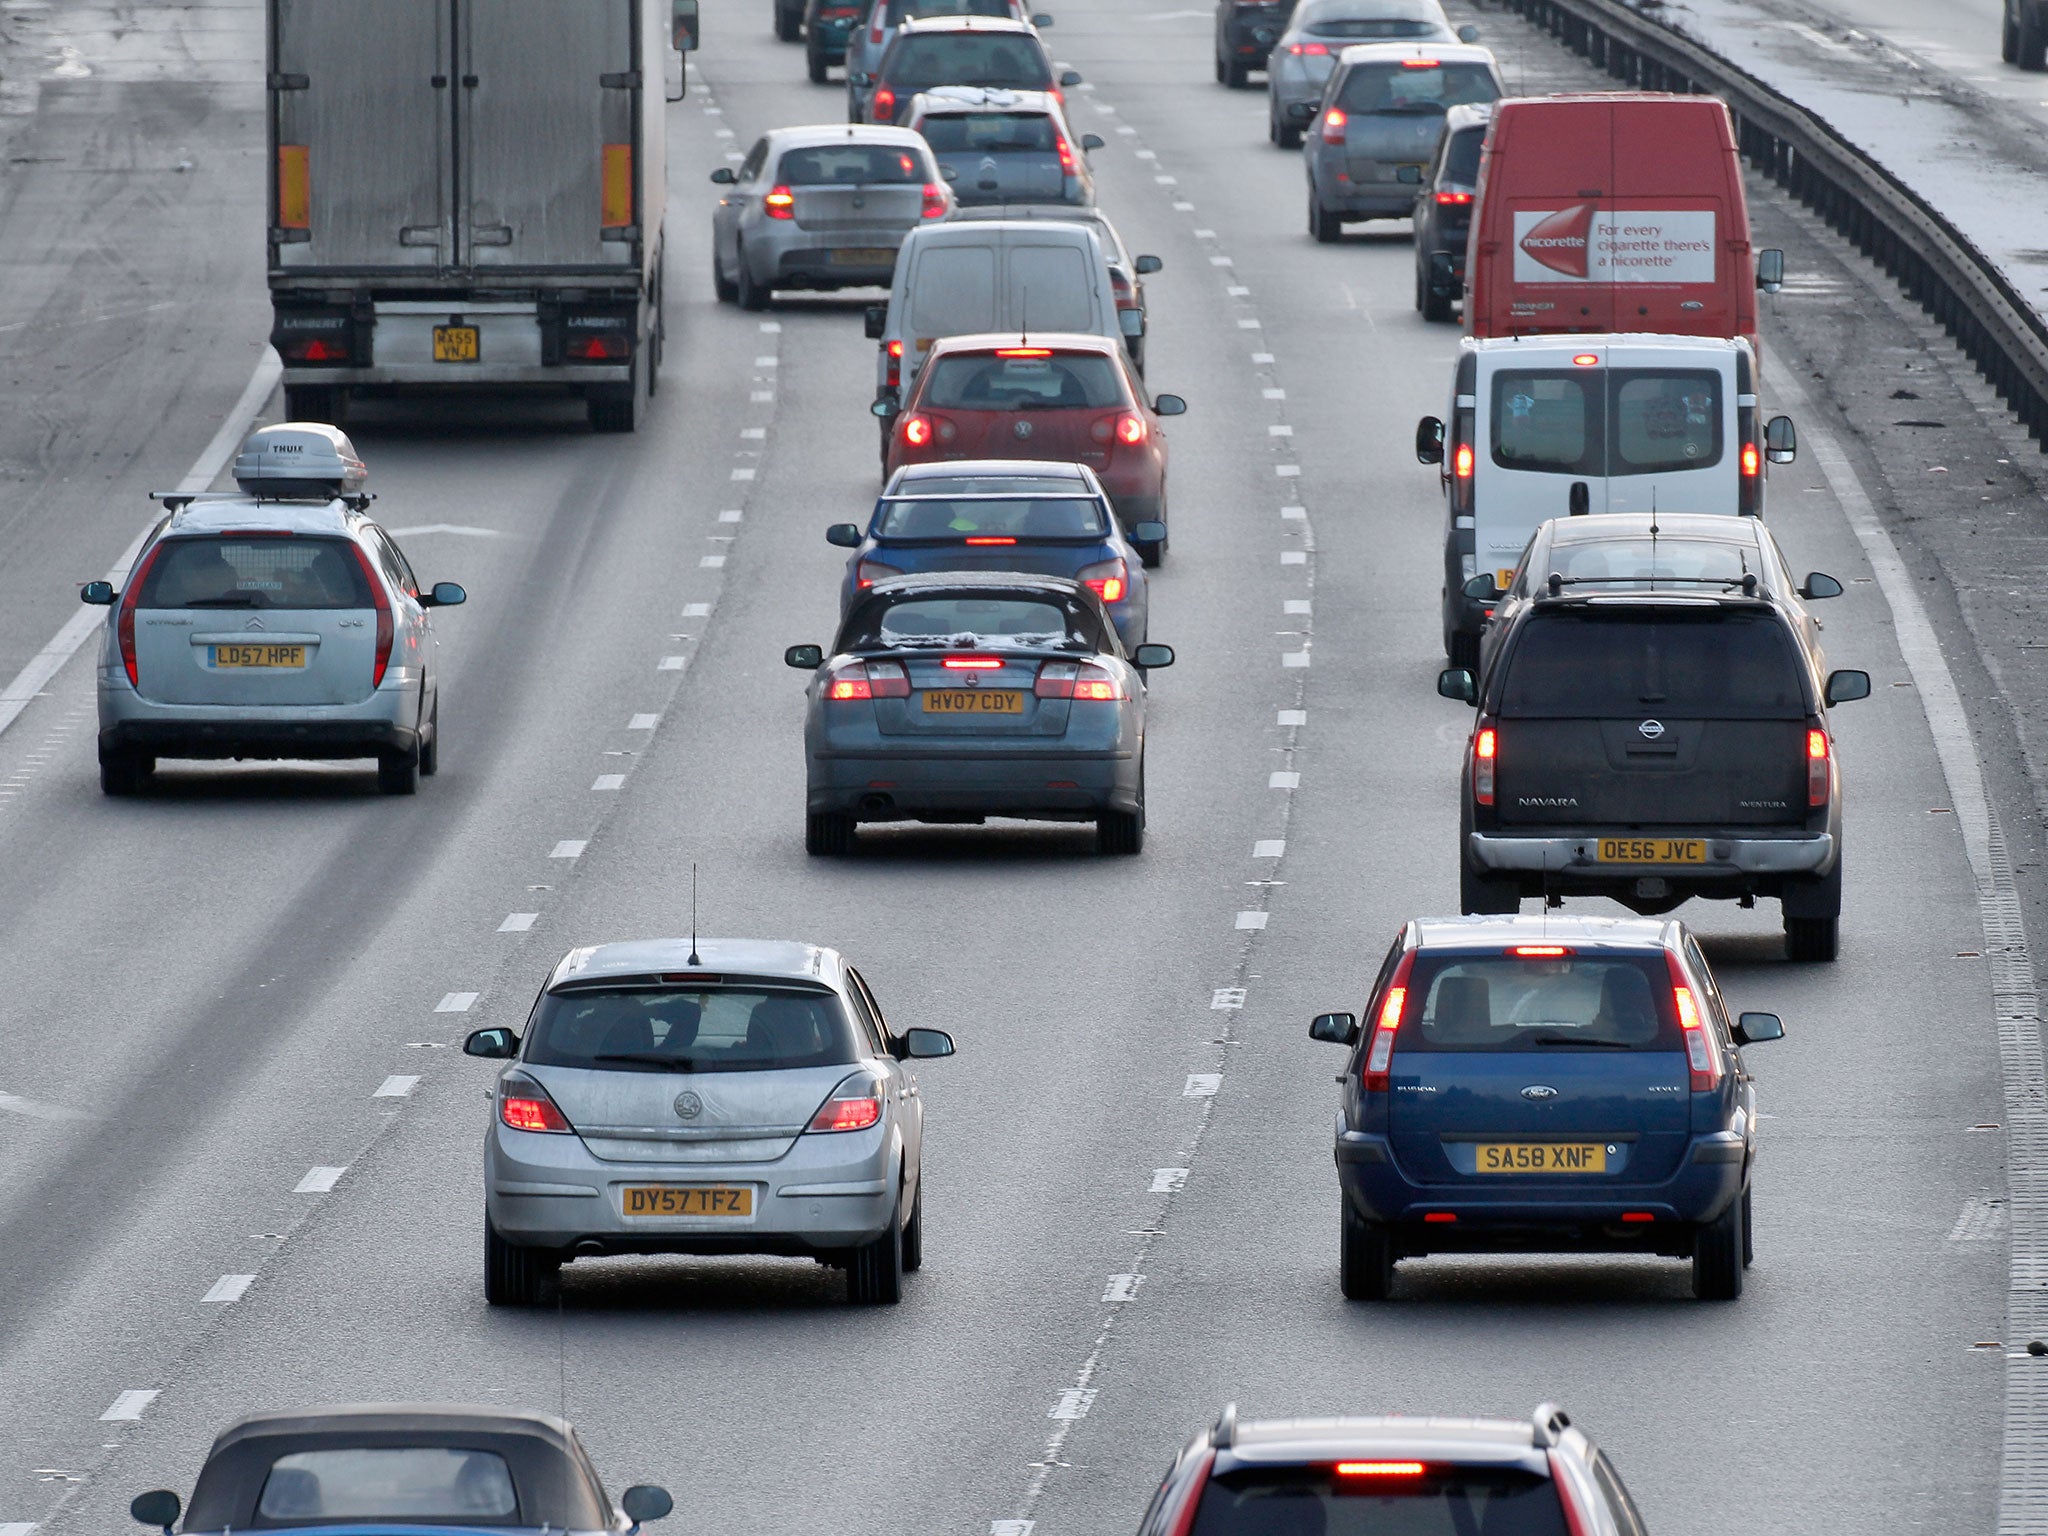 The Government says road congestion costs the economy £13bn a year, and that building more highways will help reduce it